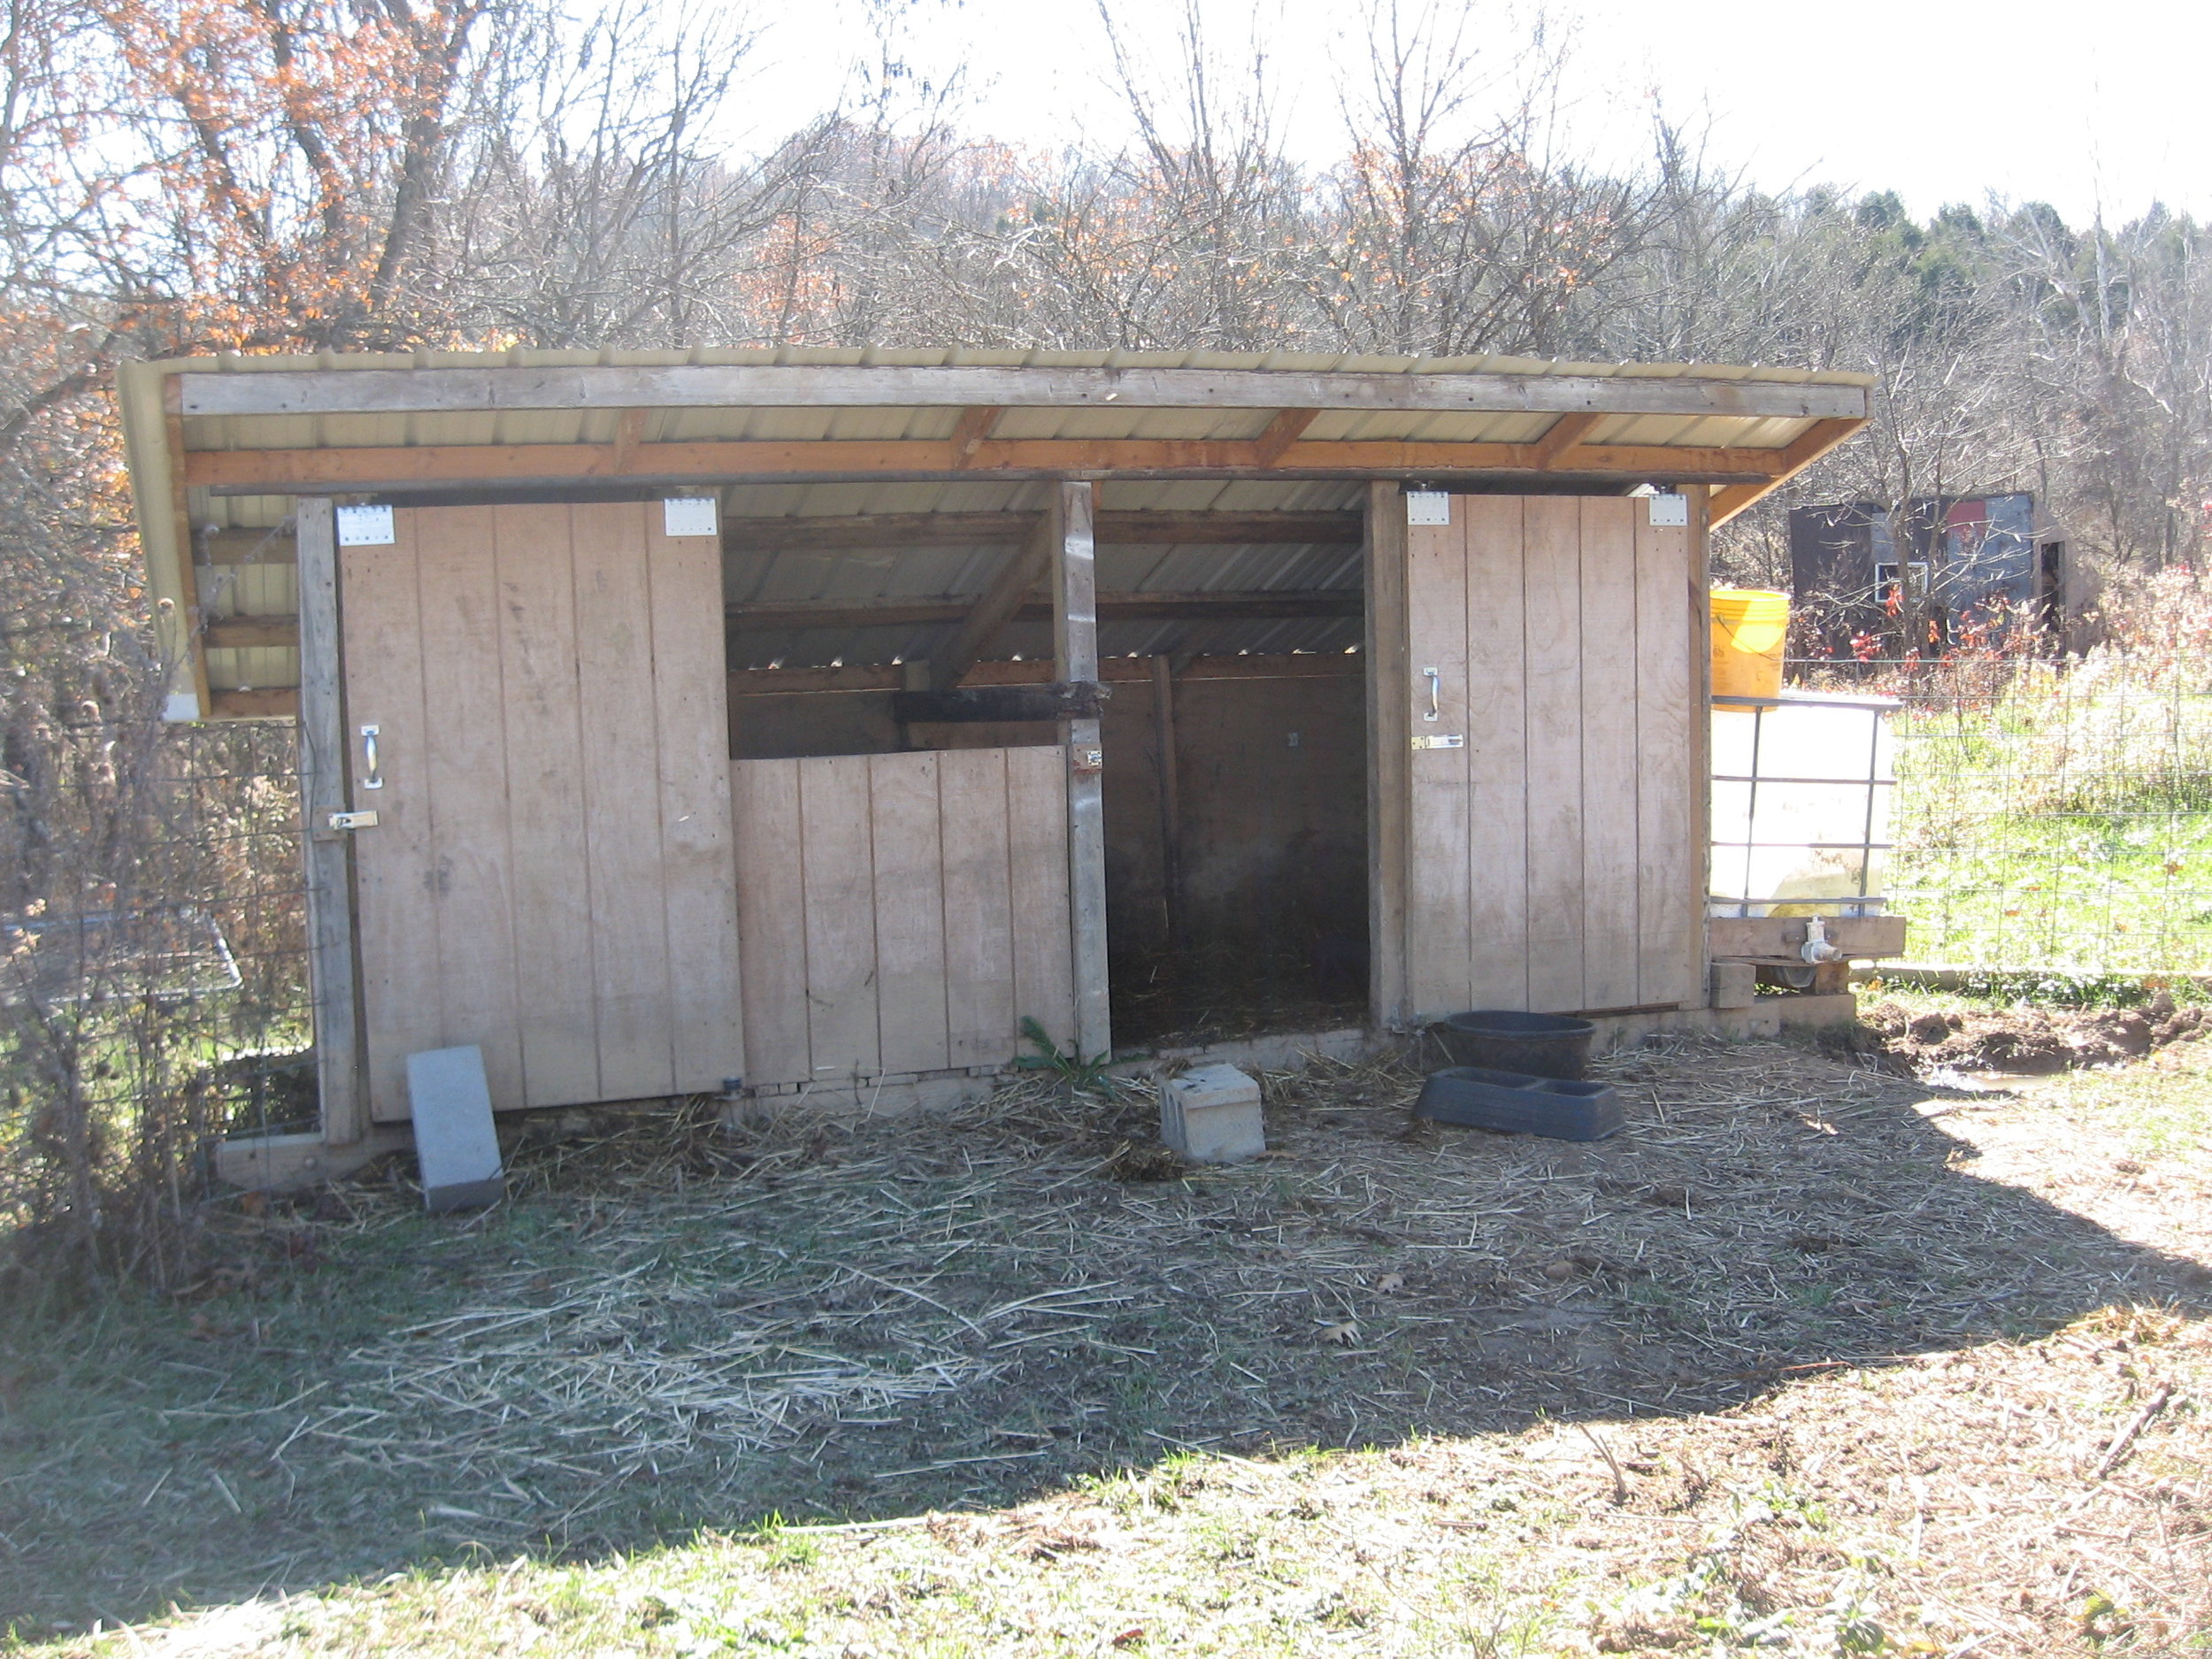 I added a small water tank to this mobile livestock shed to provide water to animals in the back field. Fox Run Environmental Education Center.